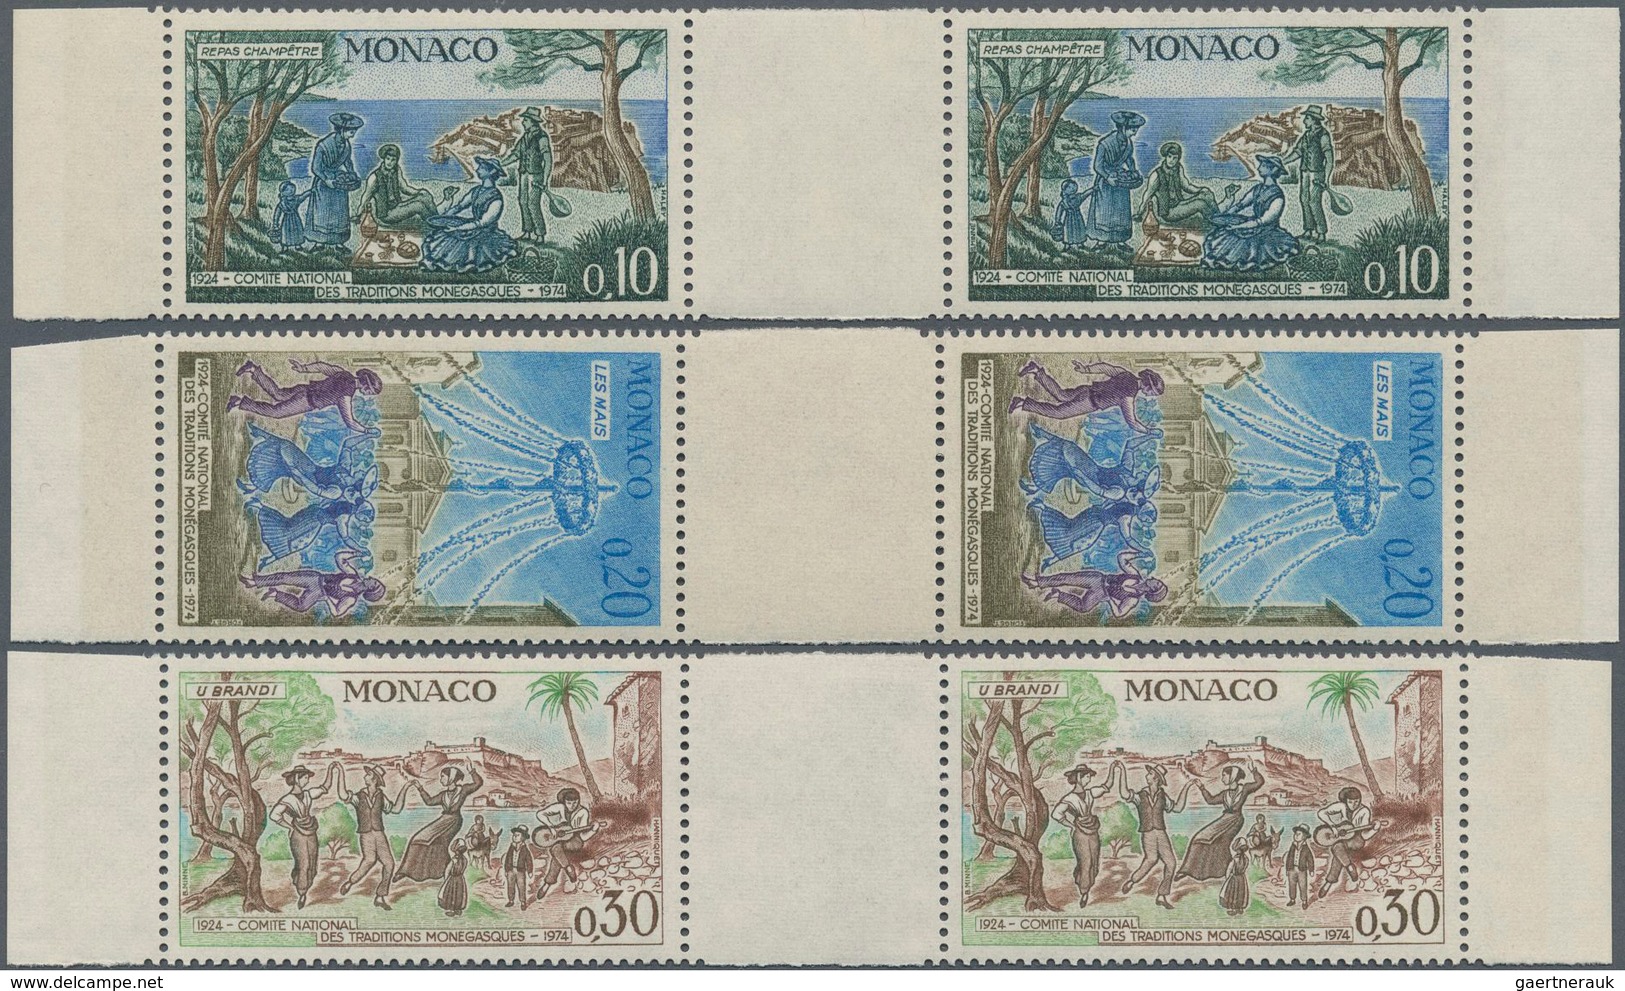 Monaco: 1973, National Heritage, 0.10fr. To 0.30fr., Three Values Each As (unfolded) Gutter Pairs, U - Used Stamps